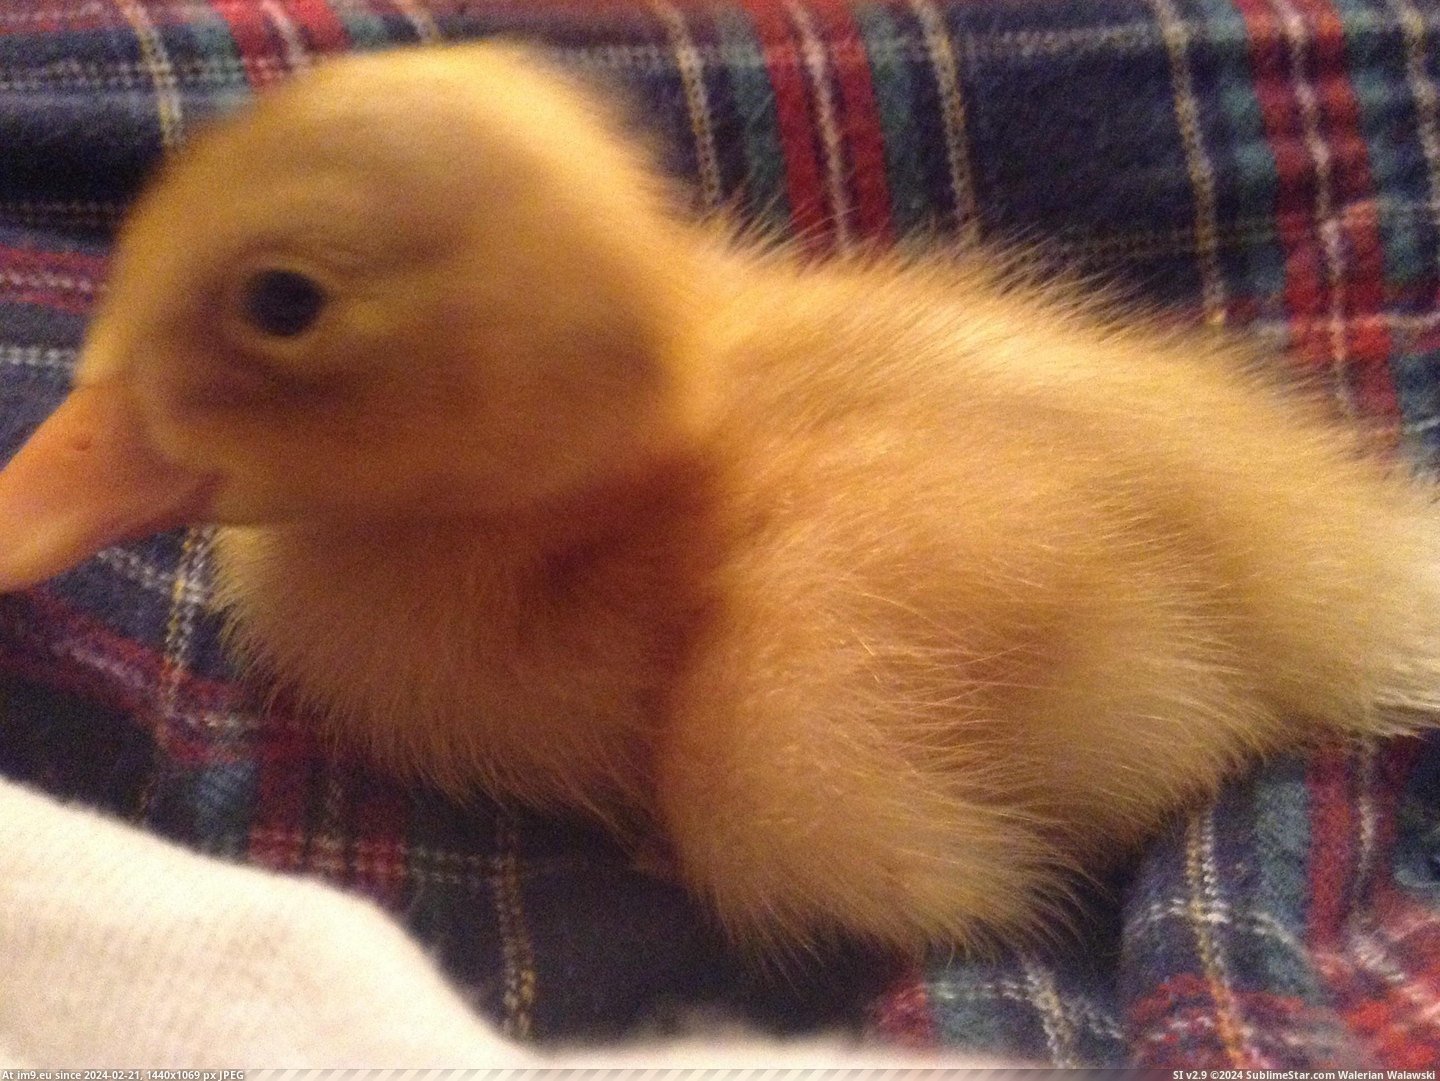 #Baby #Duck #Popularity #Excited #Stanley [Aww] My baby duck Stanley was excited for all the popularity, so here are some more pictures! 4 Pic. (Изображение из альбом My r/AWW favs))